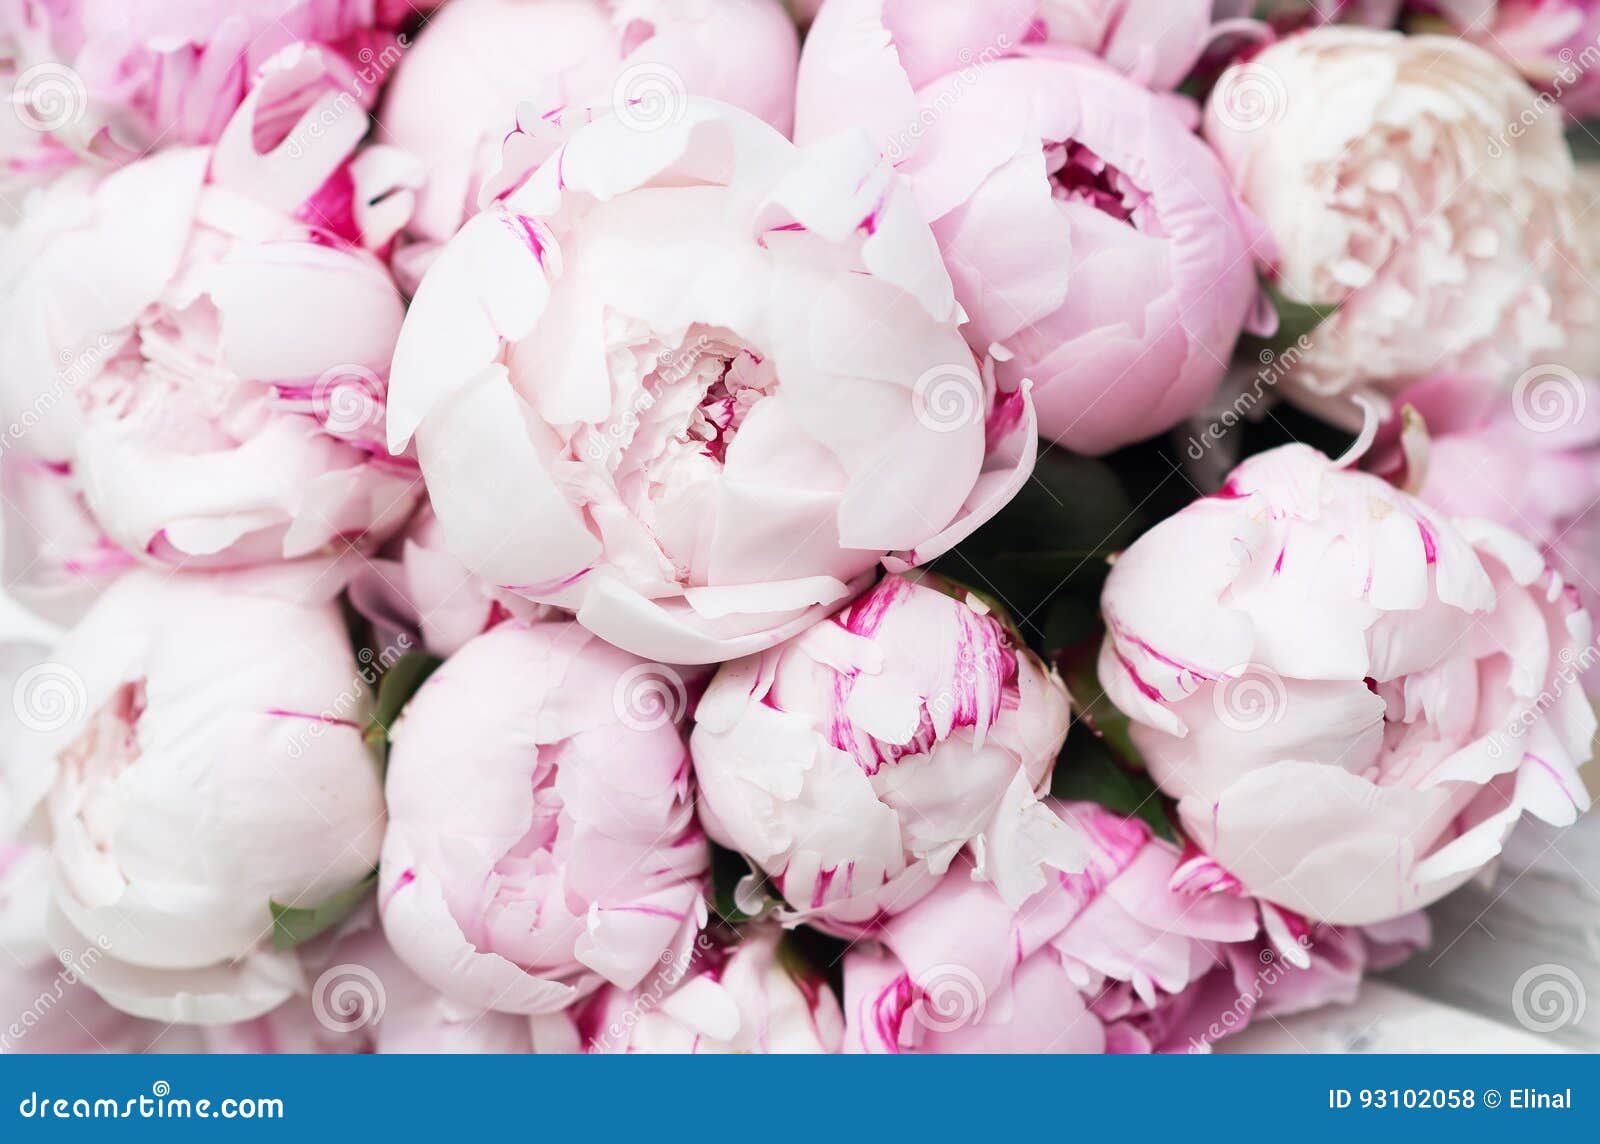 white and pink peonies. background, wallpaper